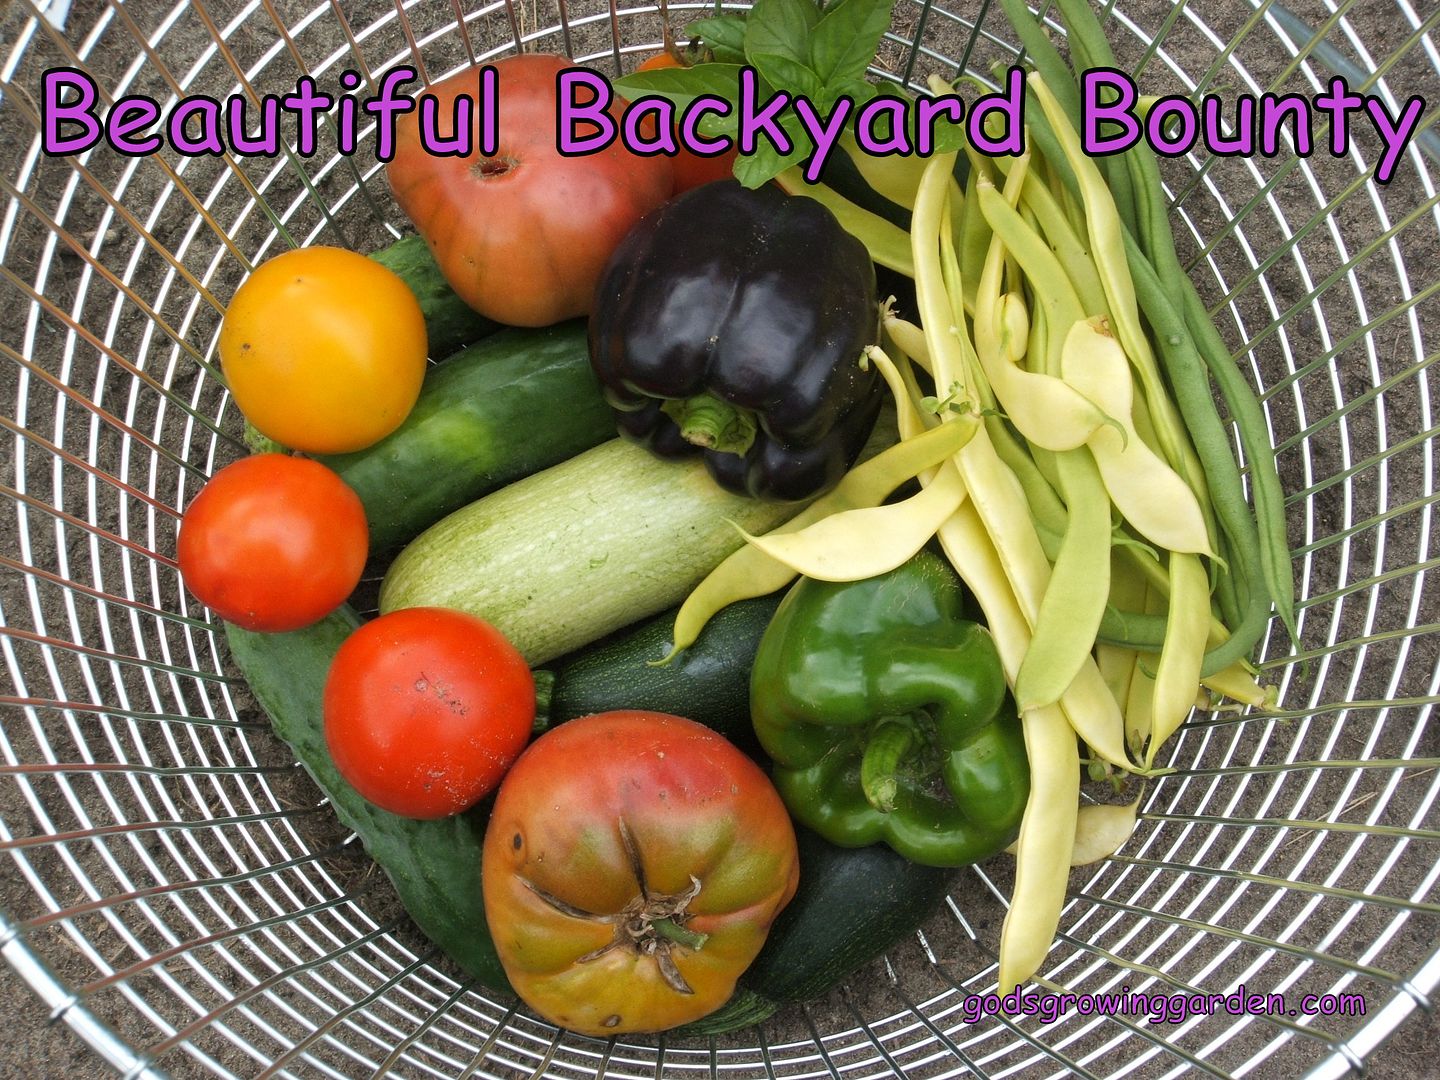 Beautiful Backyard Bounty by Angie Ouellette-Tower for godsgrowinggarden.com photo 028_zps9219c77d.jpg